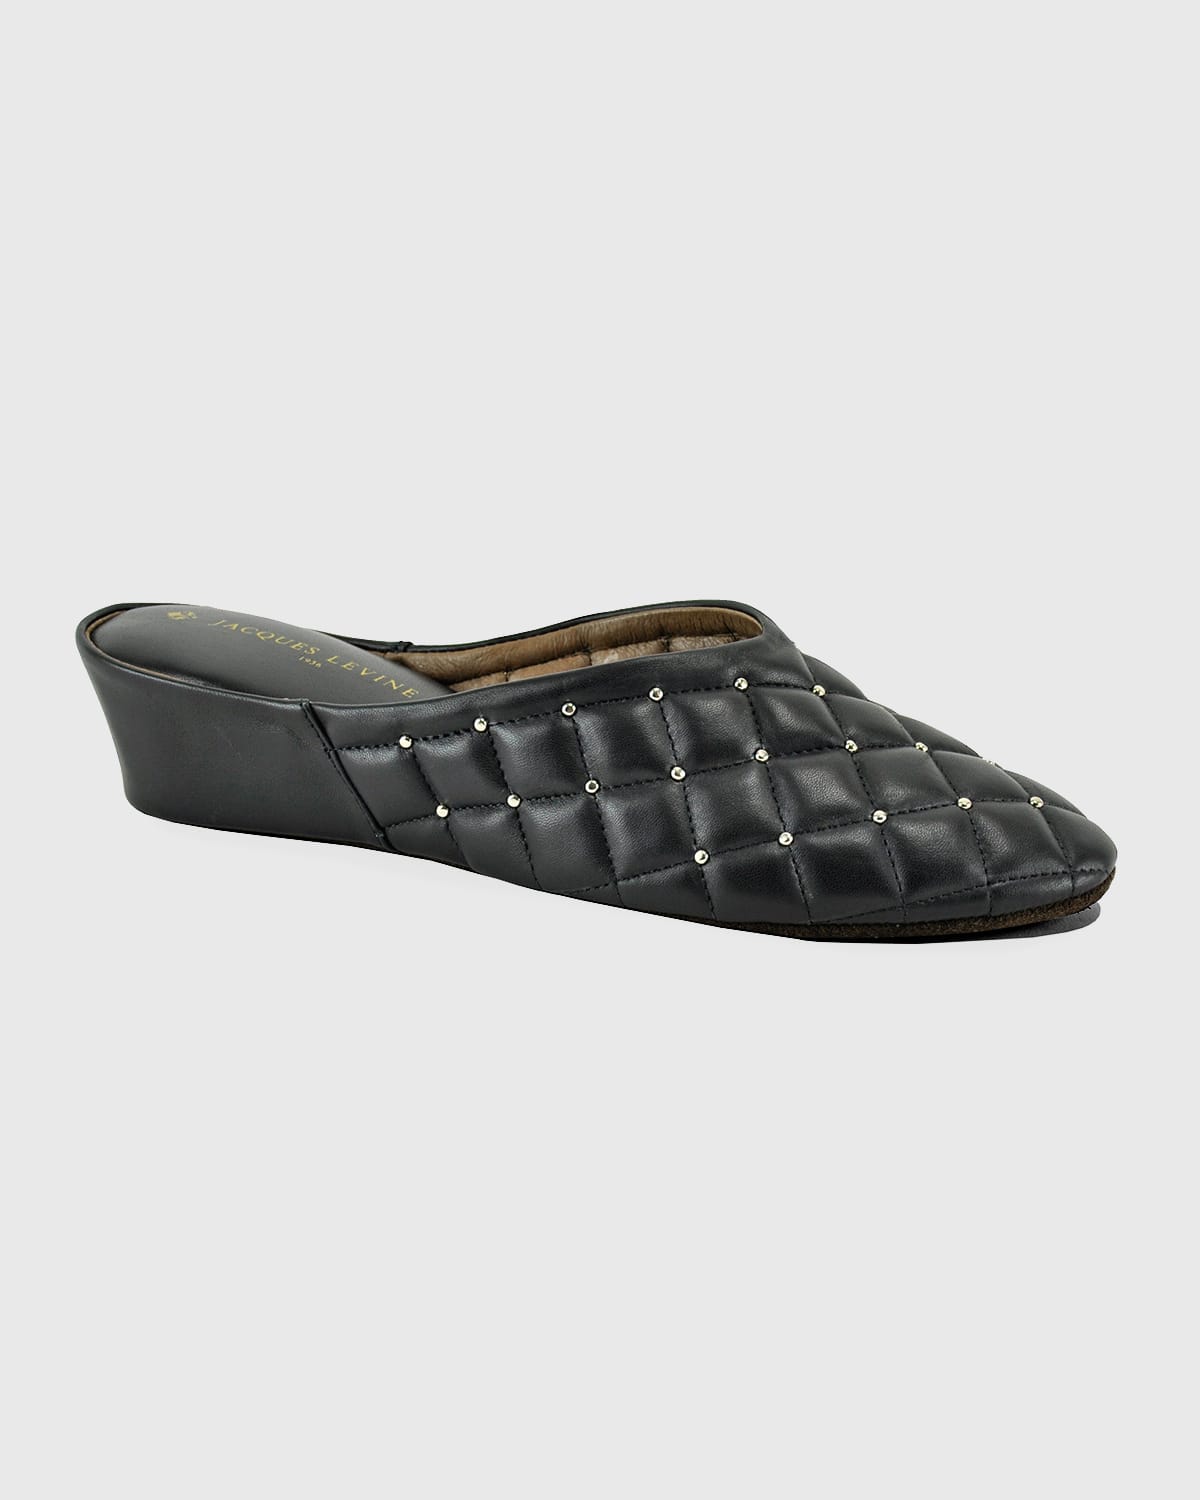 Jacques Levine Quilted Leather Studded Slippers